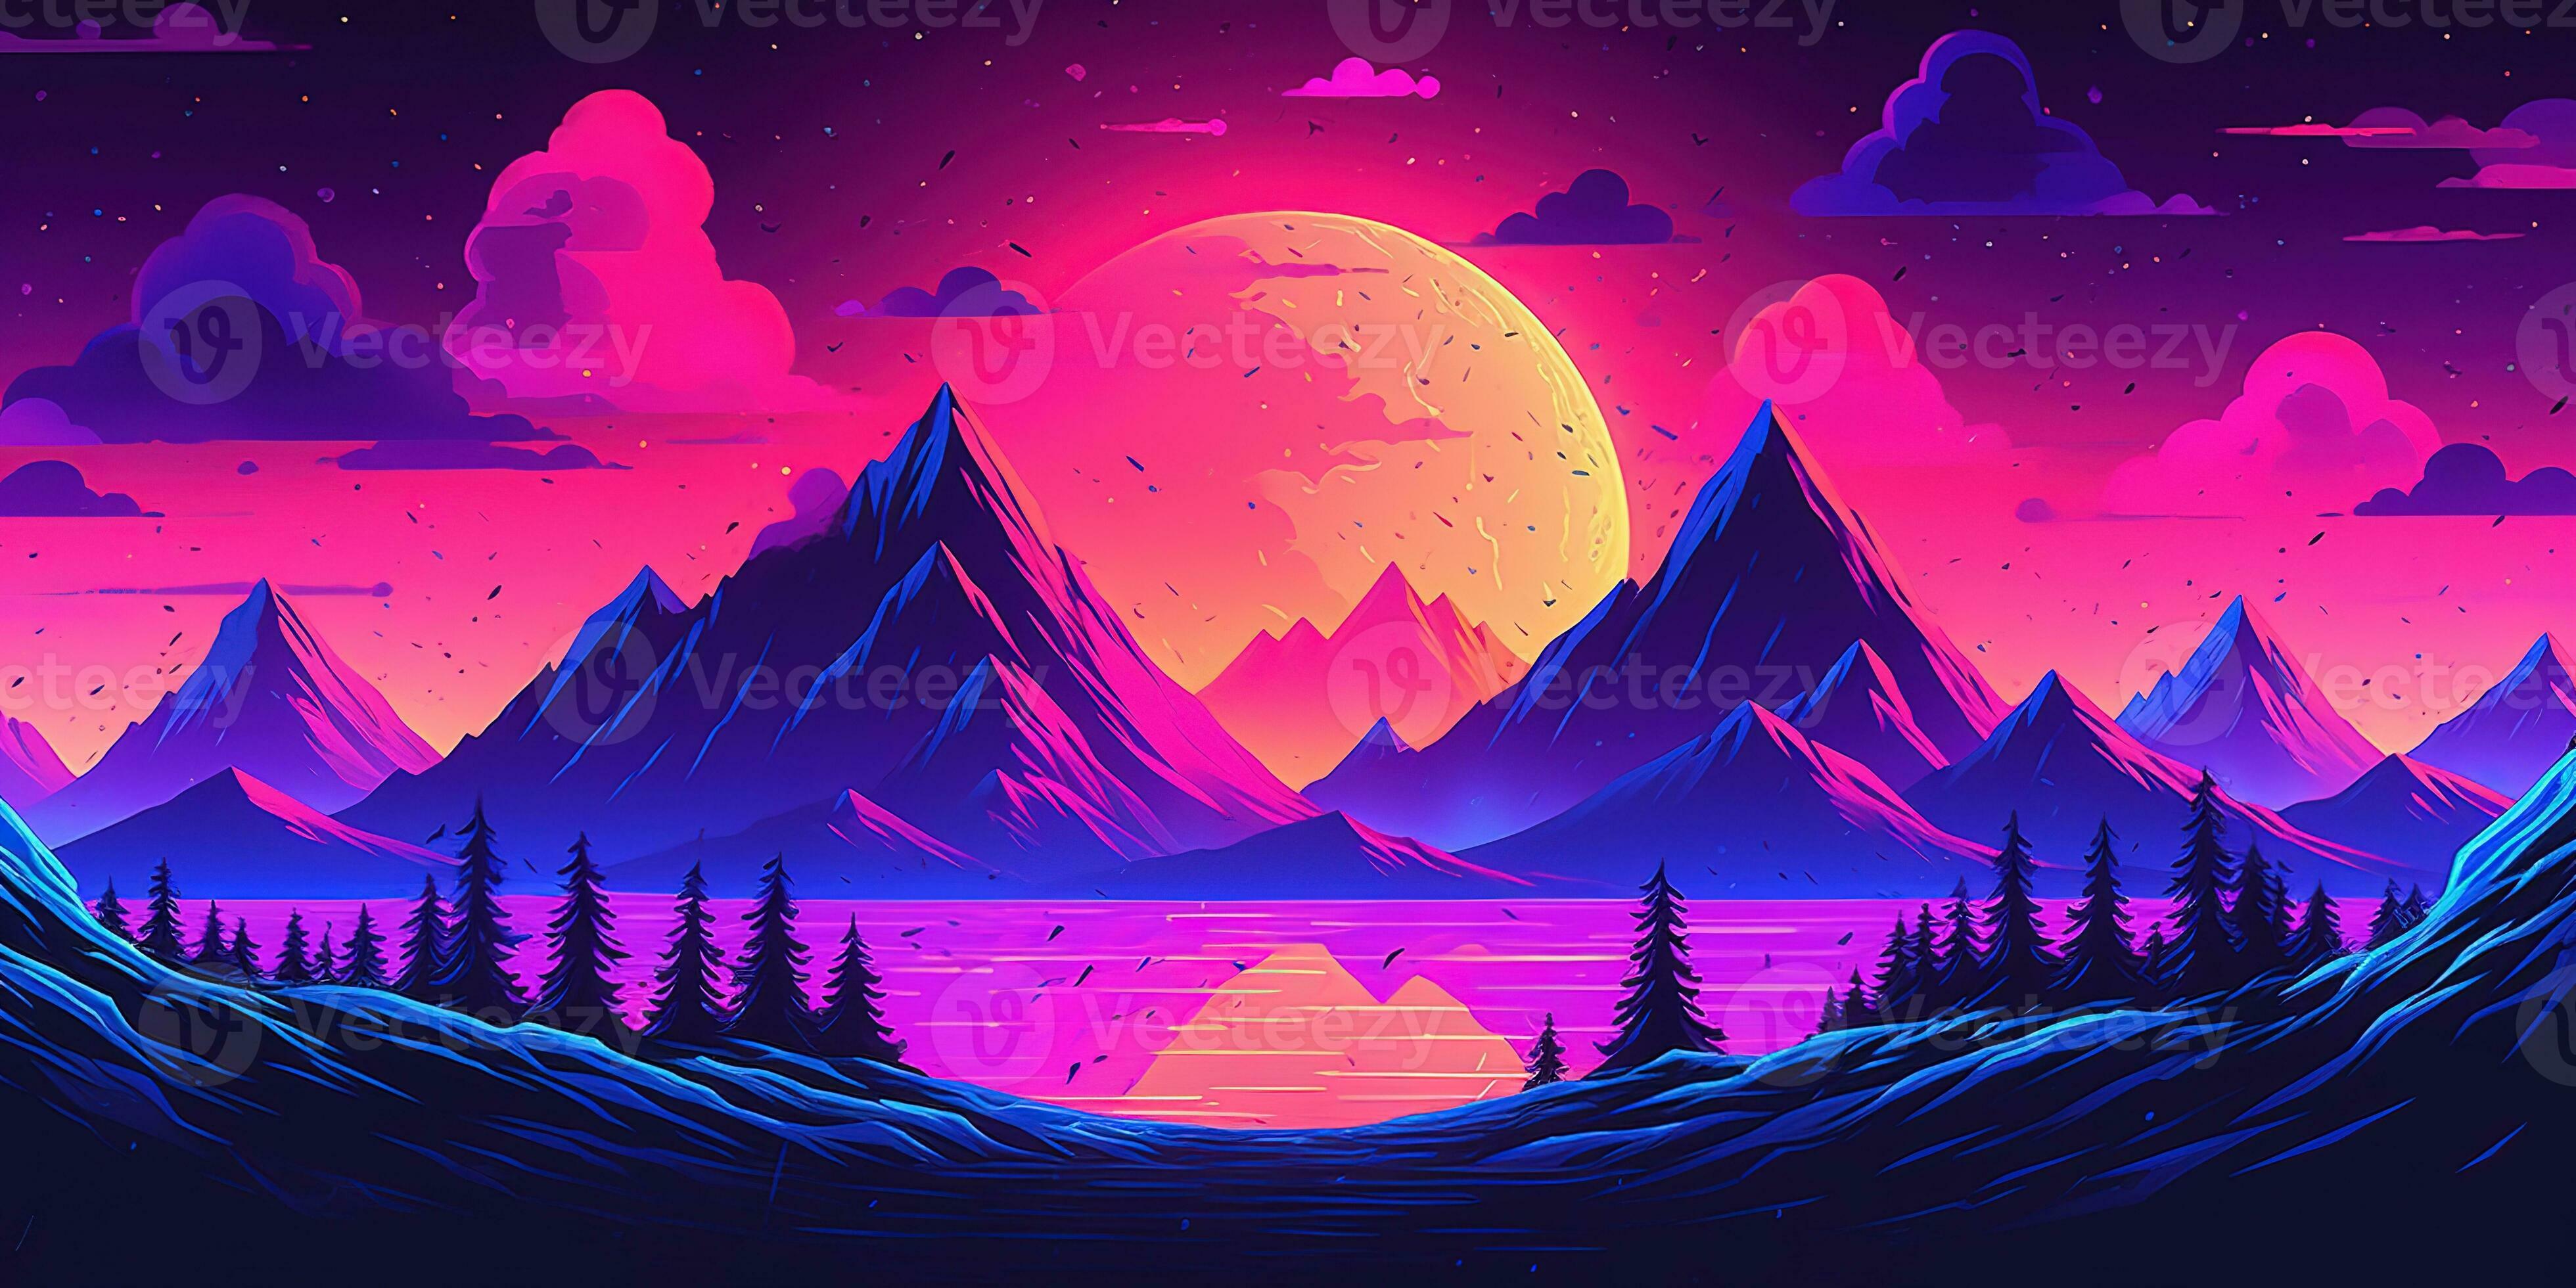 Aesthetic mountain synthwave retrowave wallpaper with a cool and vibrant neon design